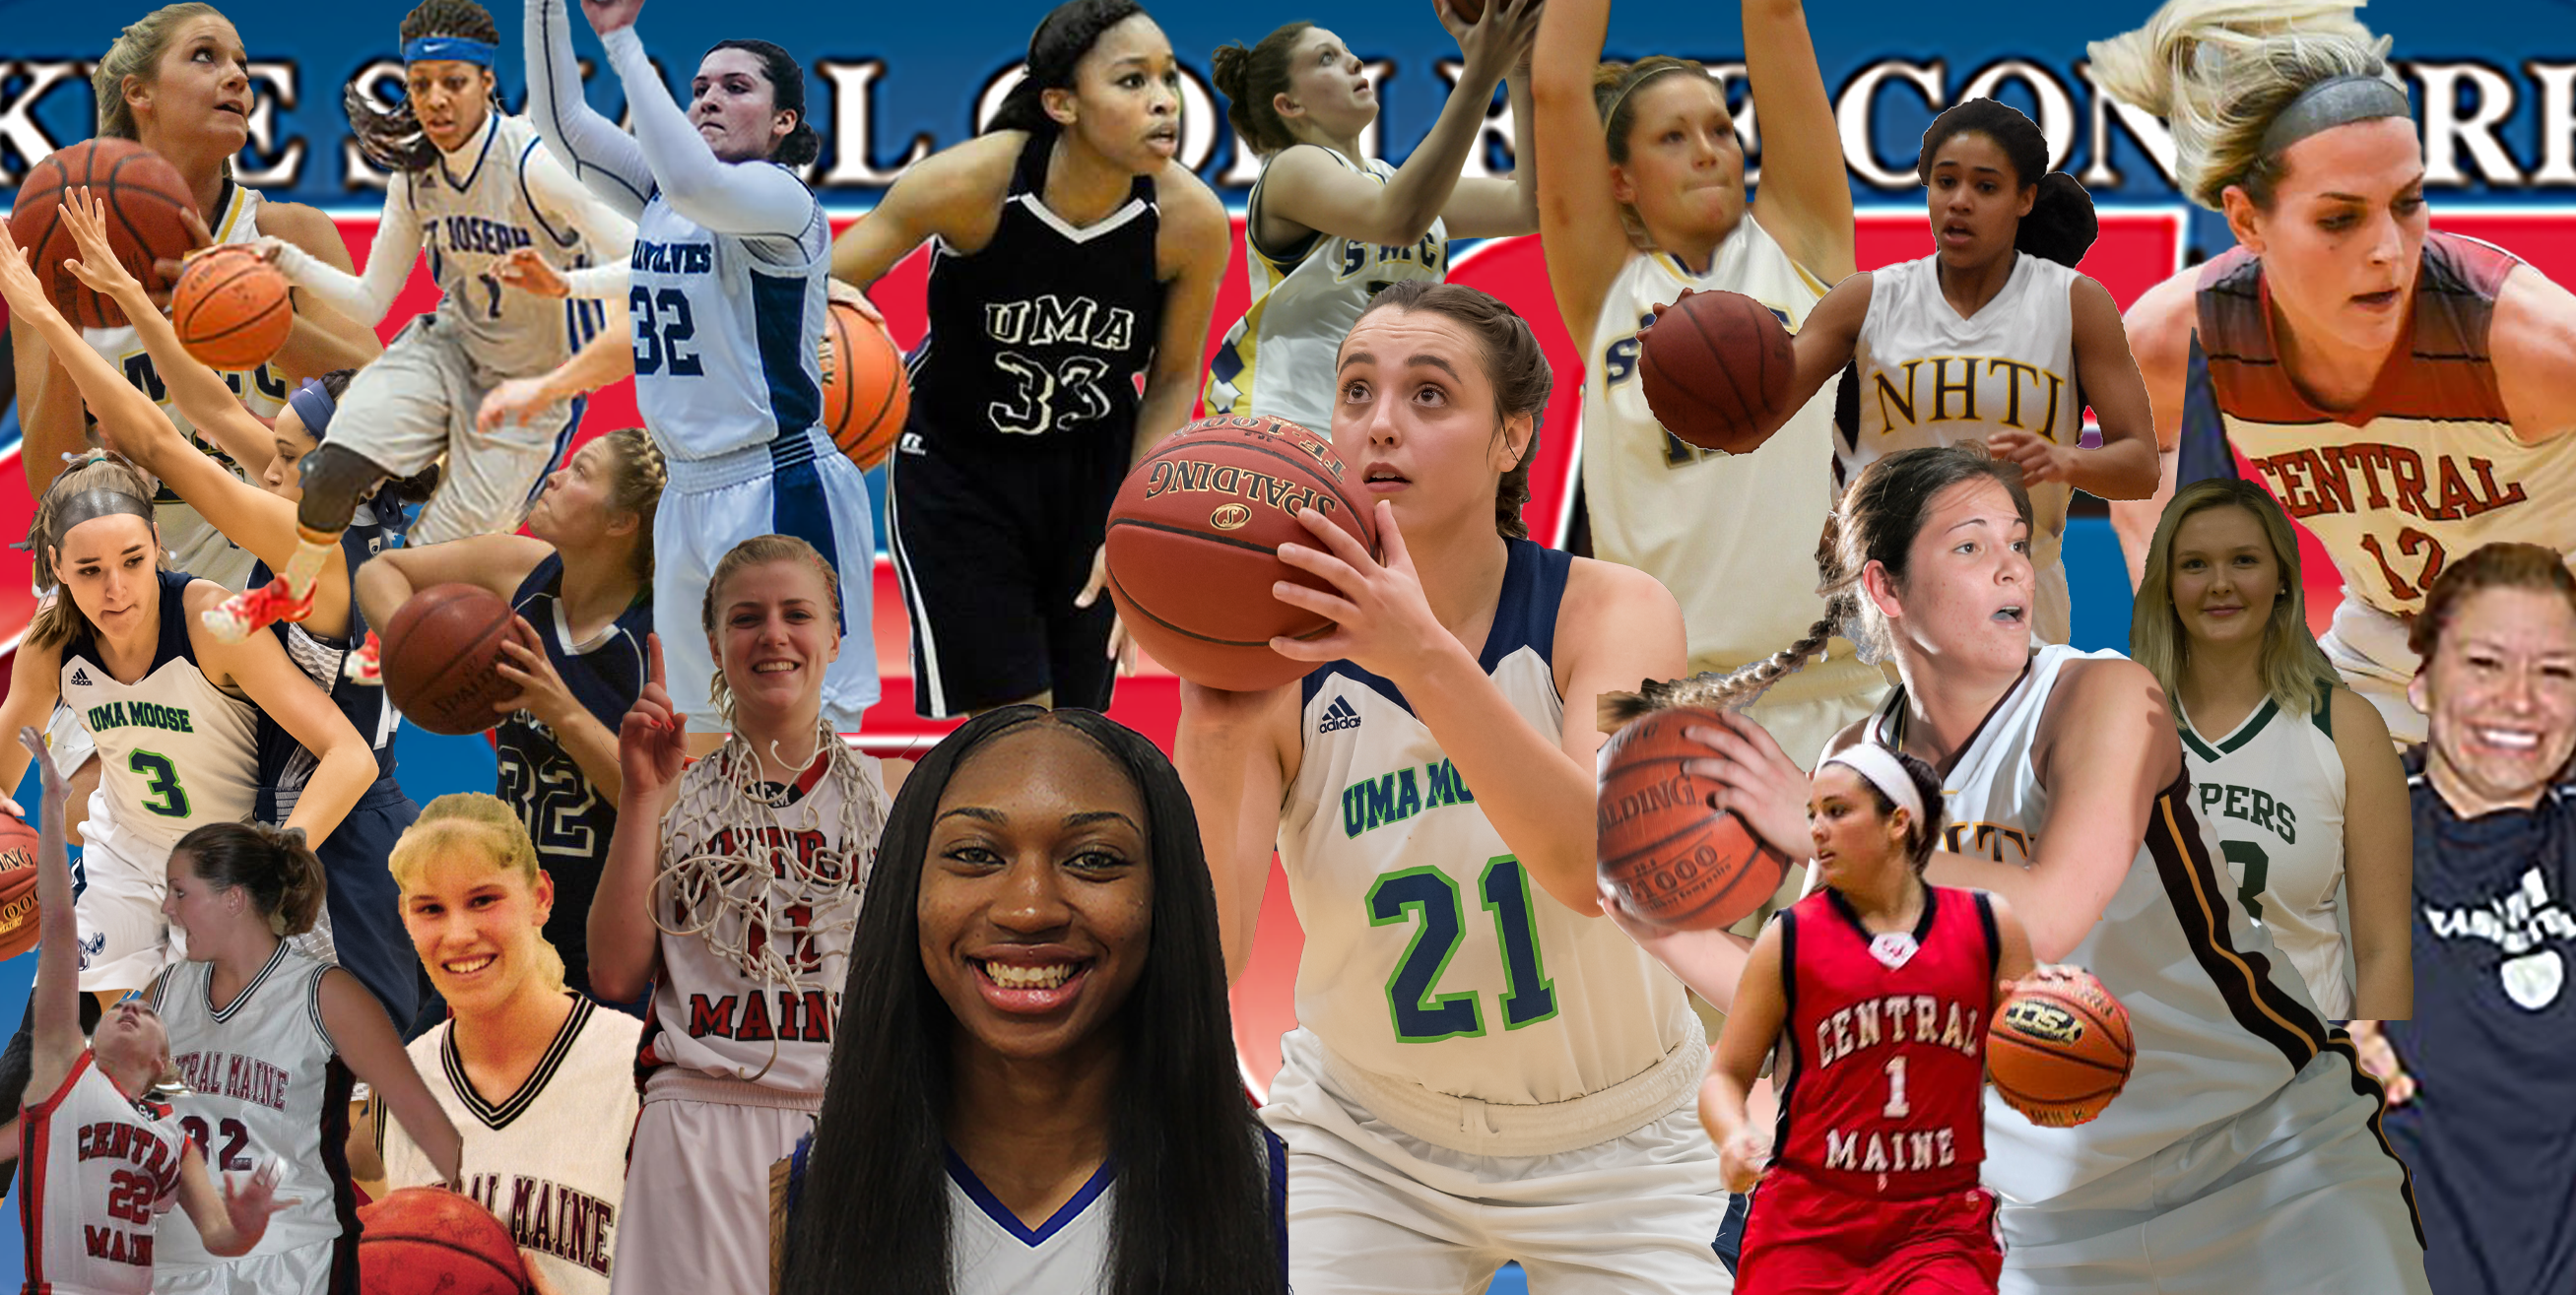 Yankee Small College Conference announces Women's Basketball Twin Decades Team